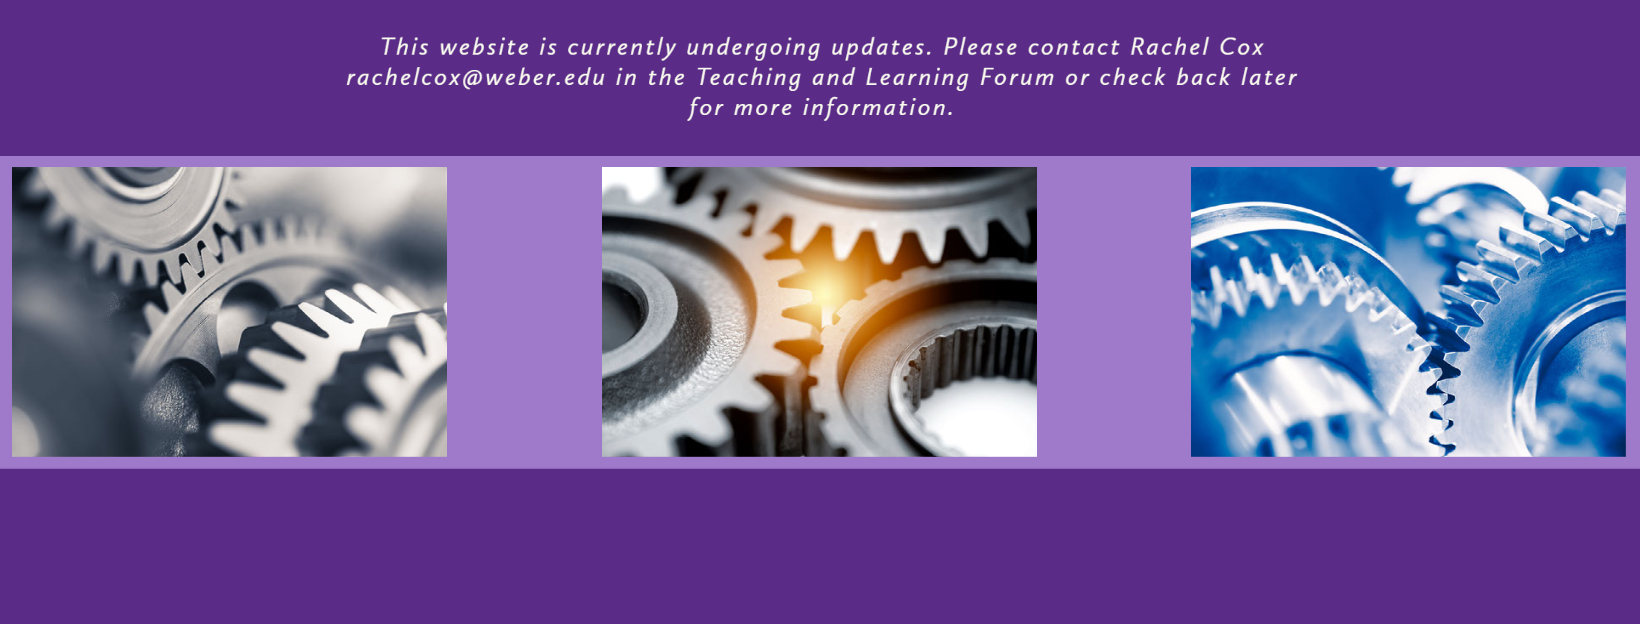 This website is currently undergoing updates. Please contact Rachel Cox rachelcox@weber.edu in the Teaching and Learning Forum or check back later for more information.